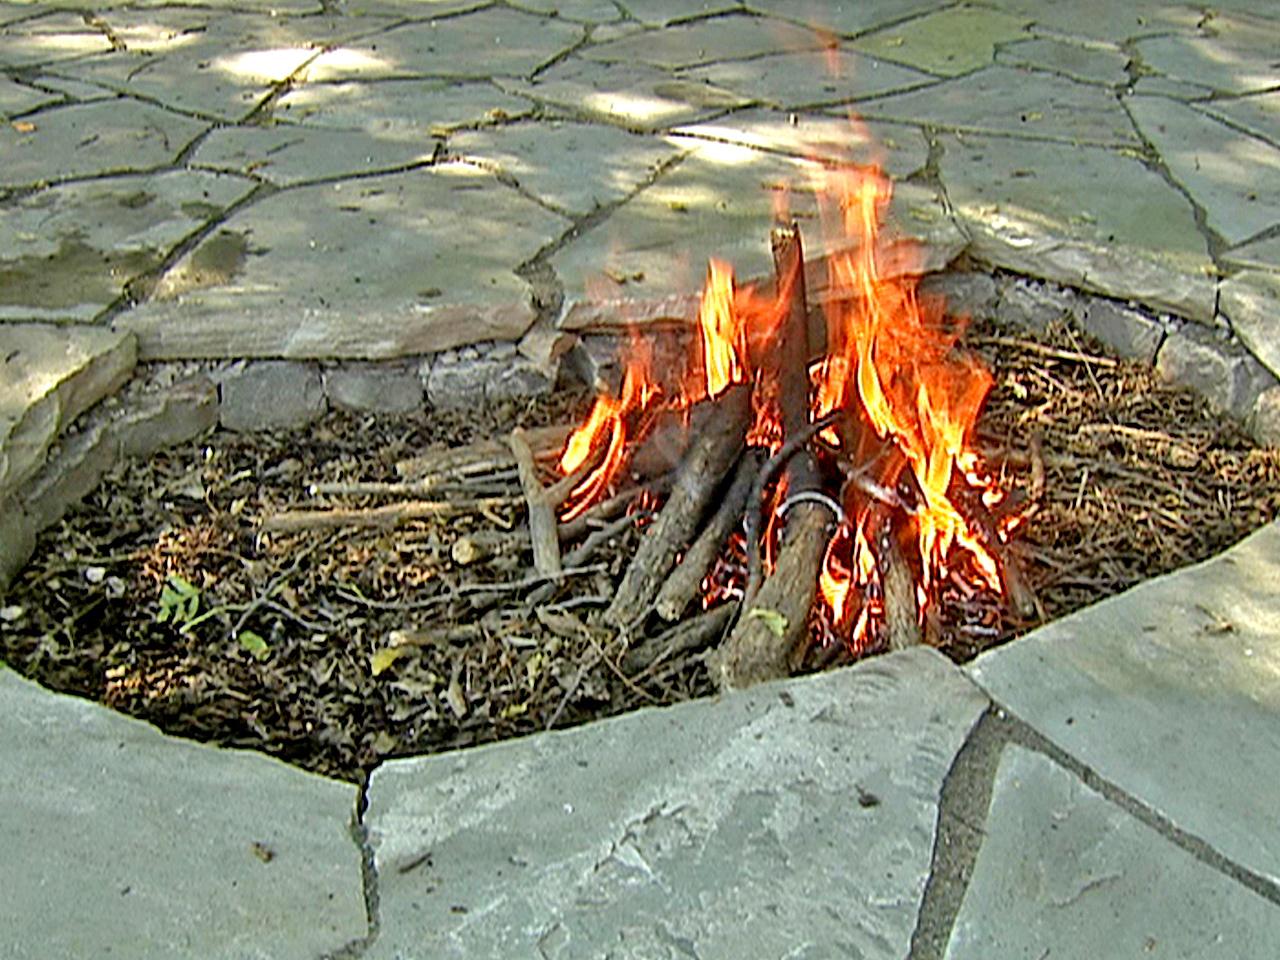 Outdoor Fire Pits And Pit Safety, Can I Burn Wood In A Gas Fire Pit